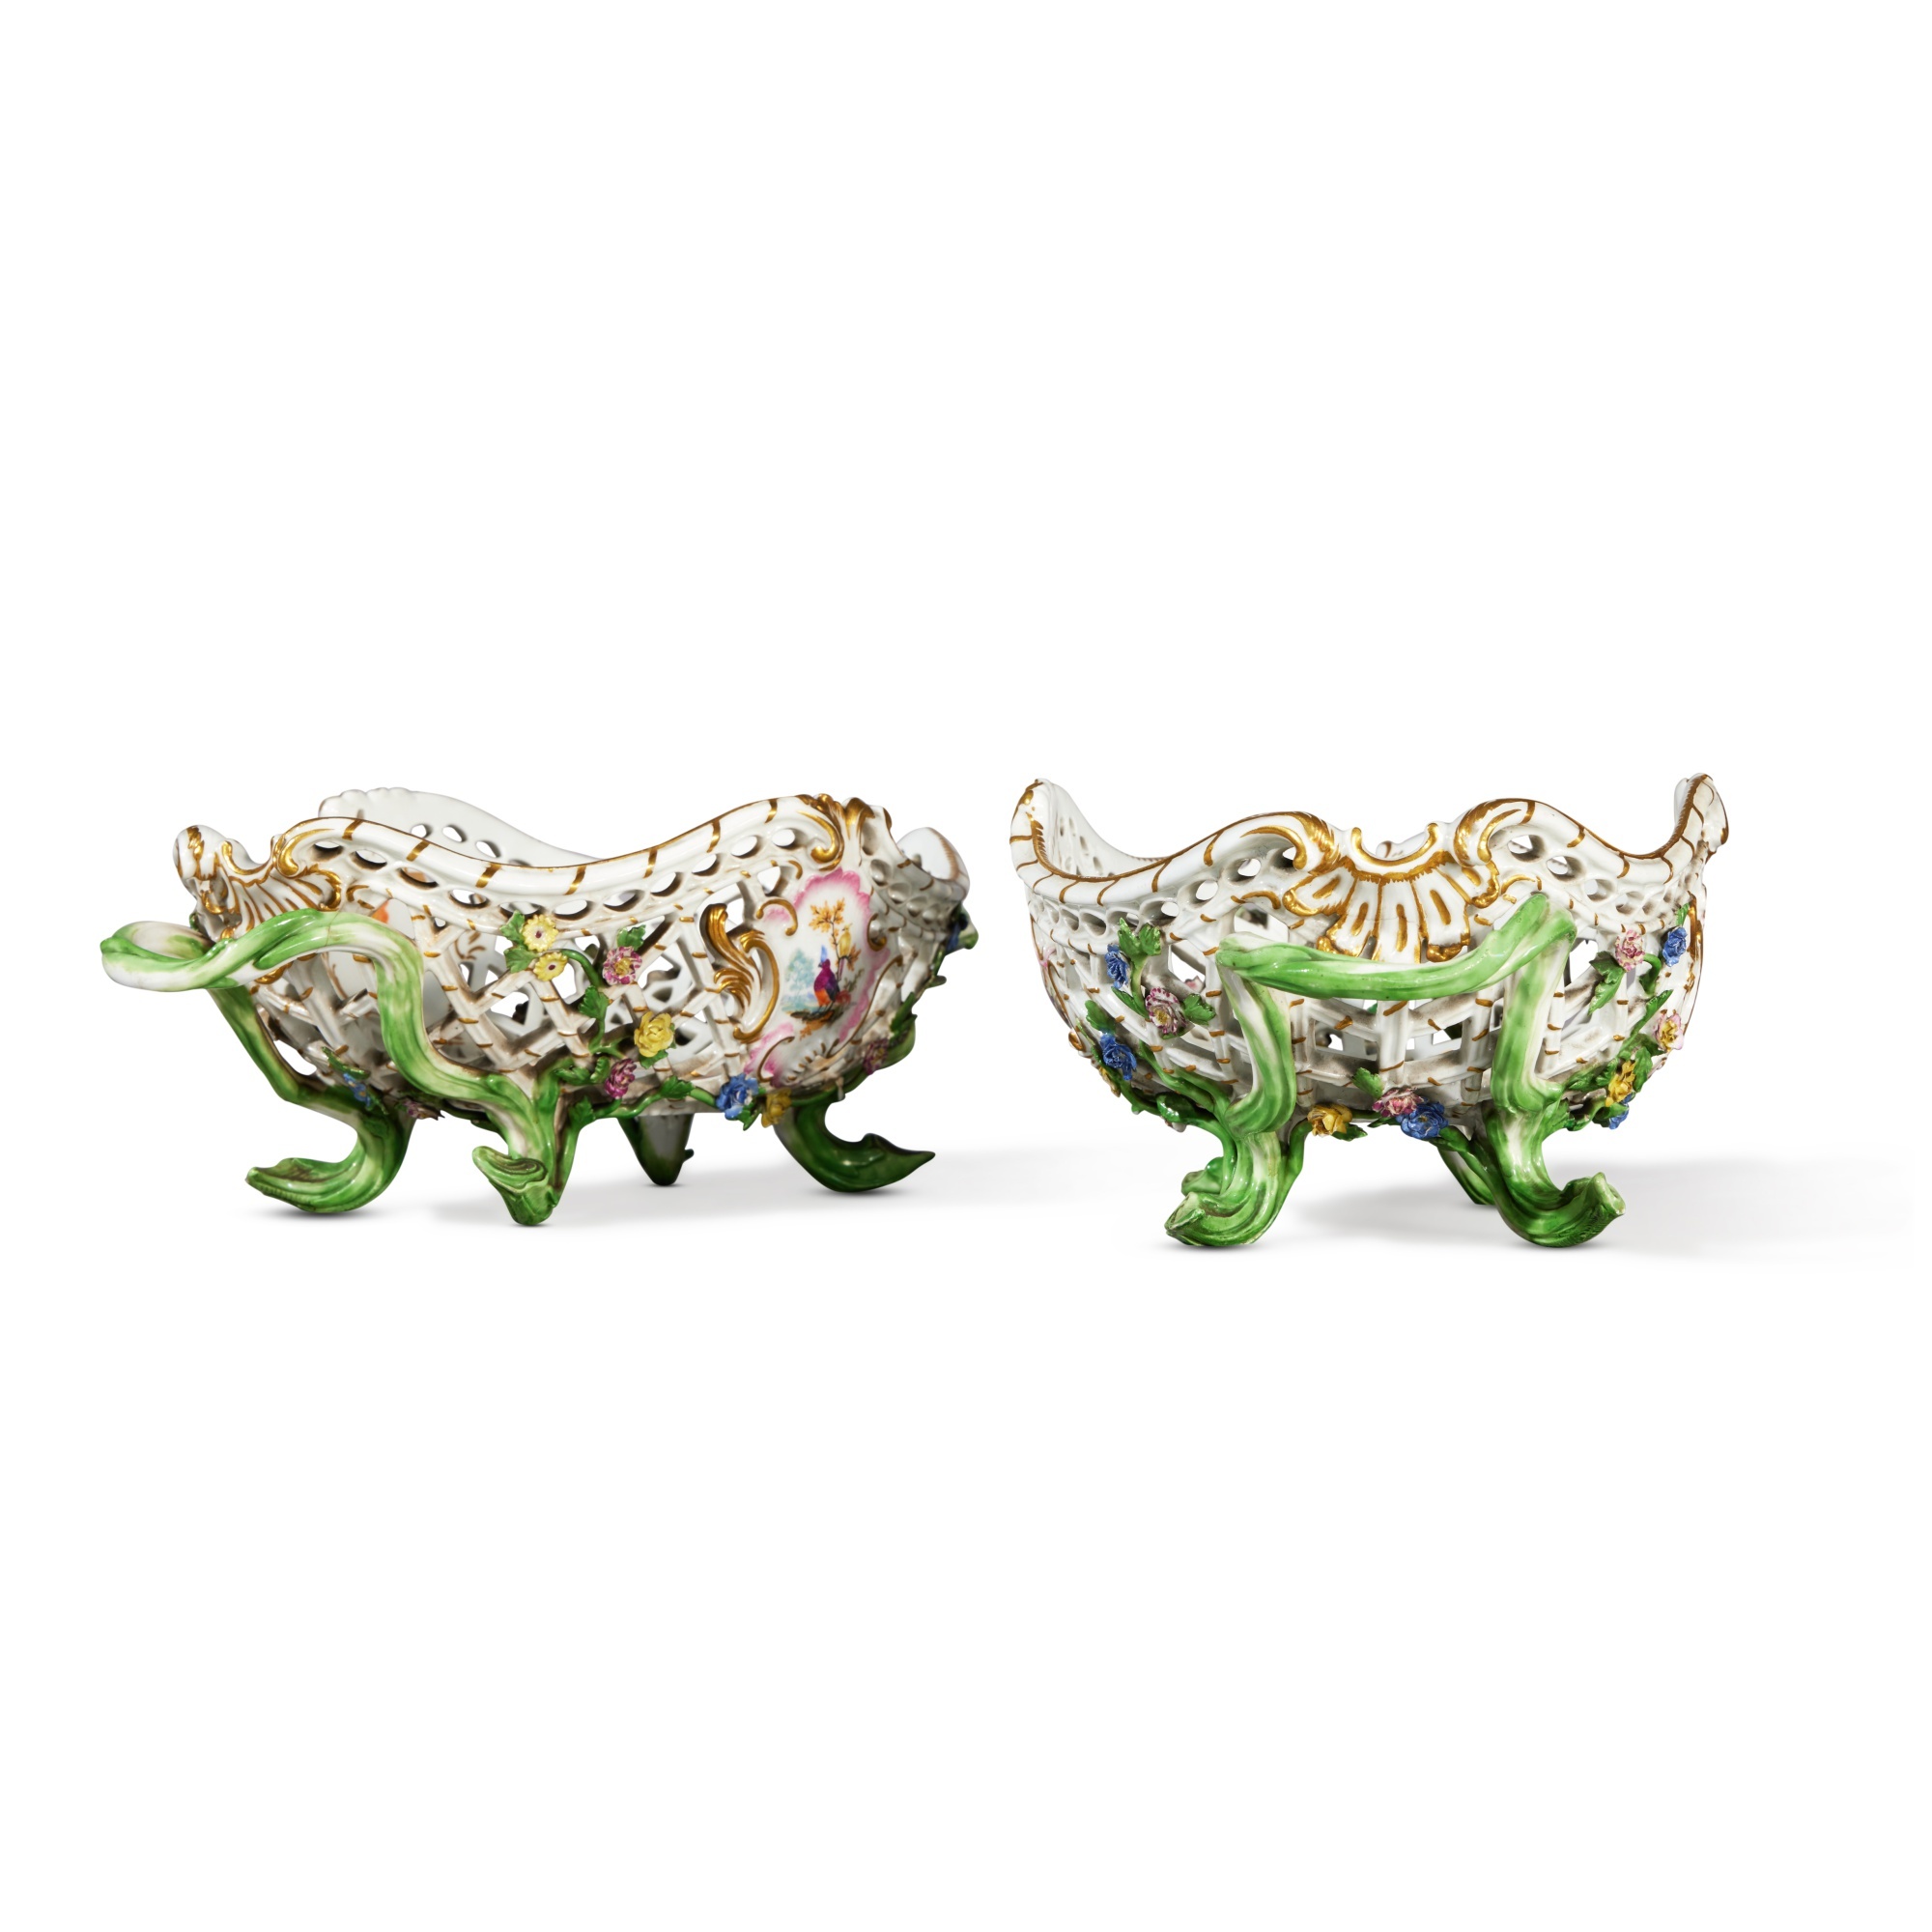 A Pair of Meissen Reticulated Footed Baskets, Circa 1770 - Image 3 of 4